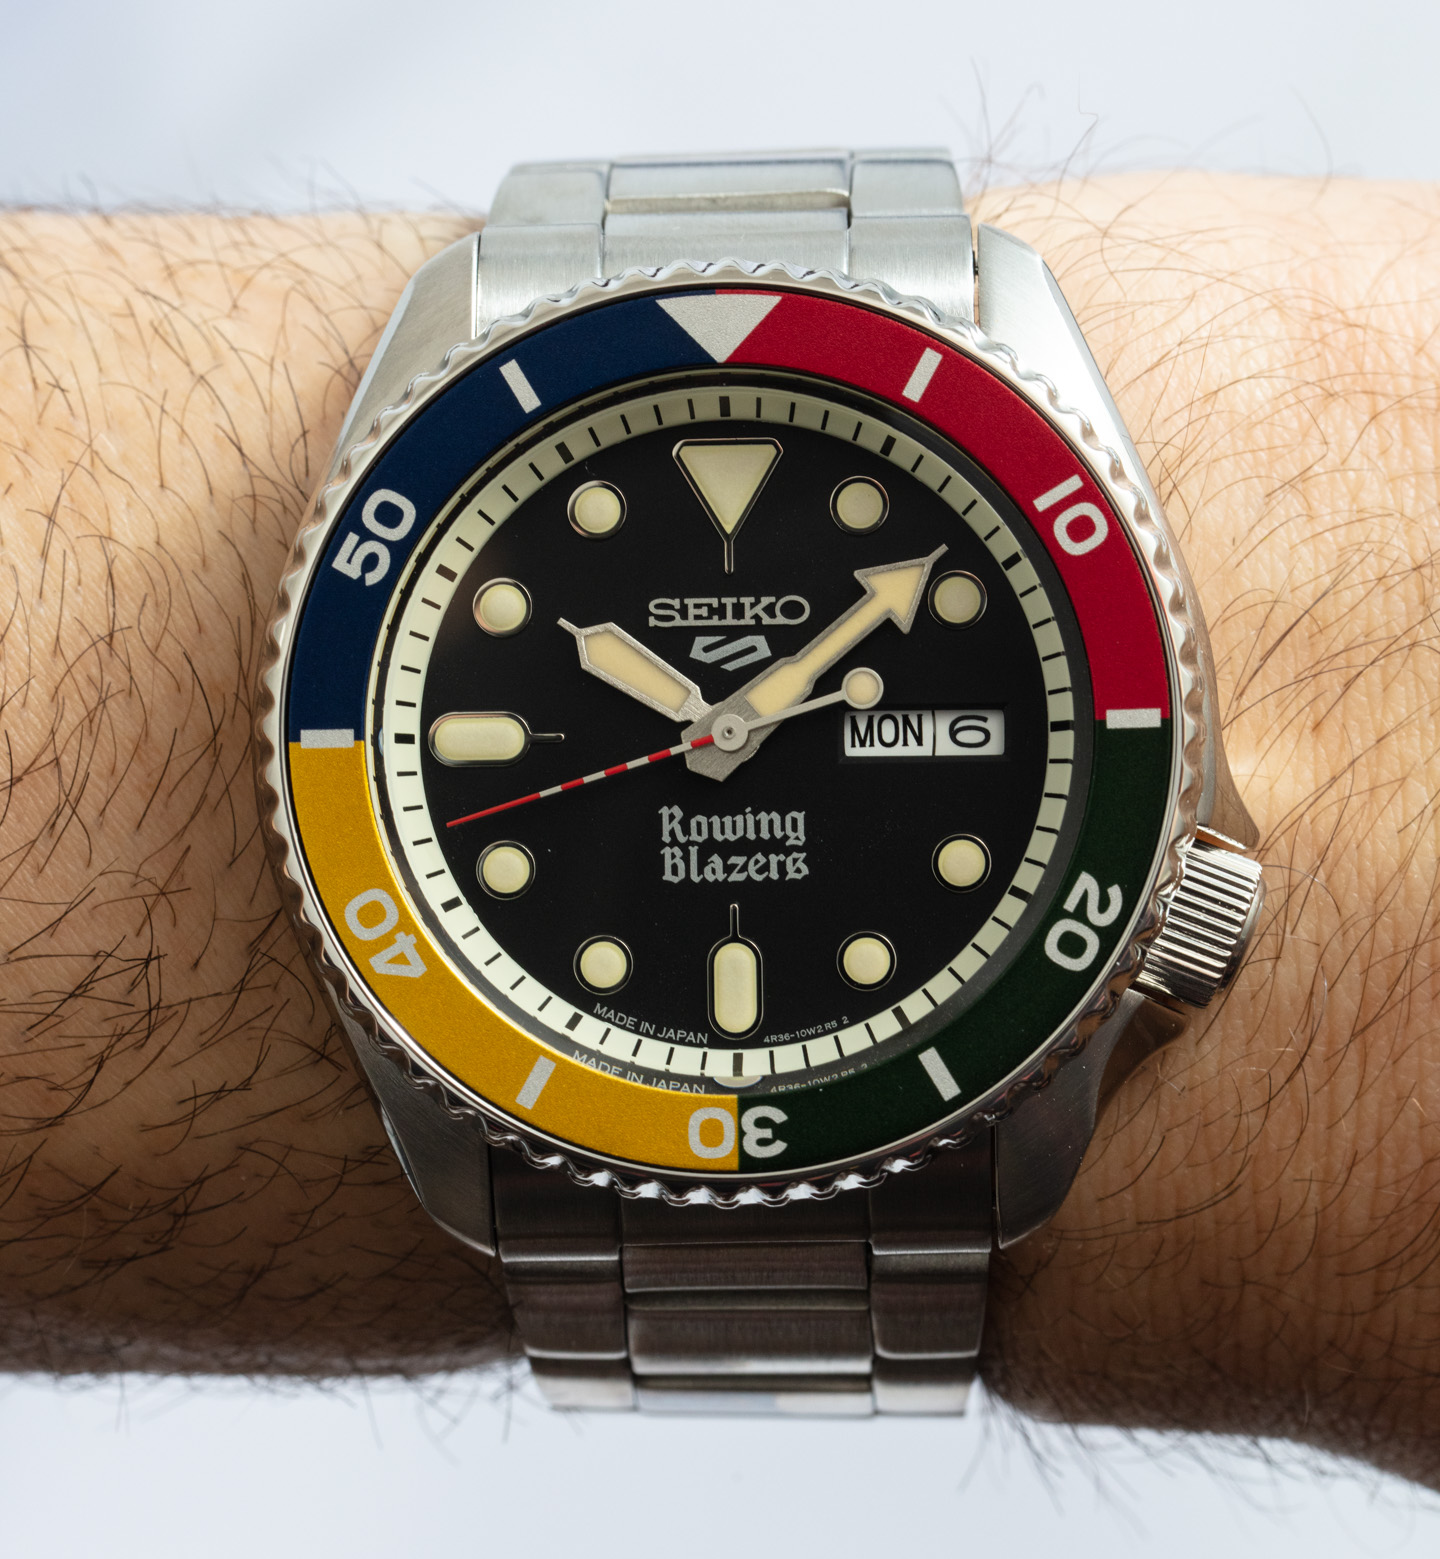 Hands-On: Seiko 5 Sports x Rowing Blazers Watches With Video Interview |  aBlogtoWatch